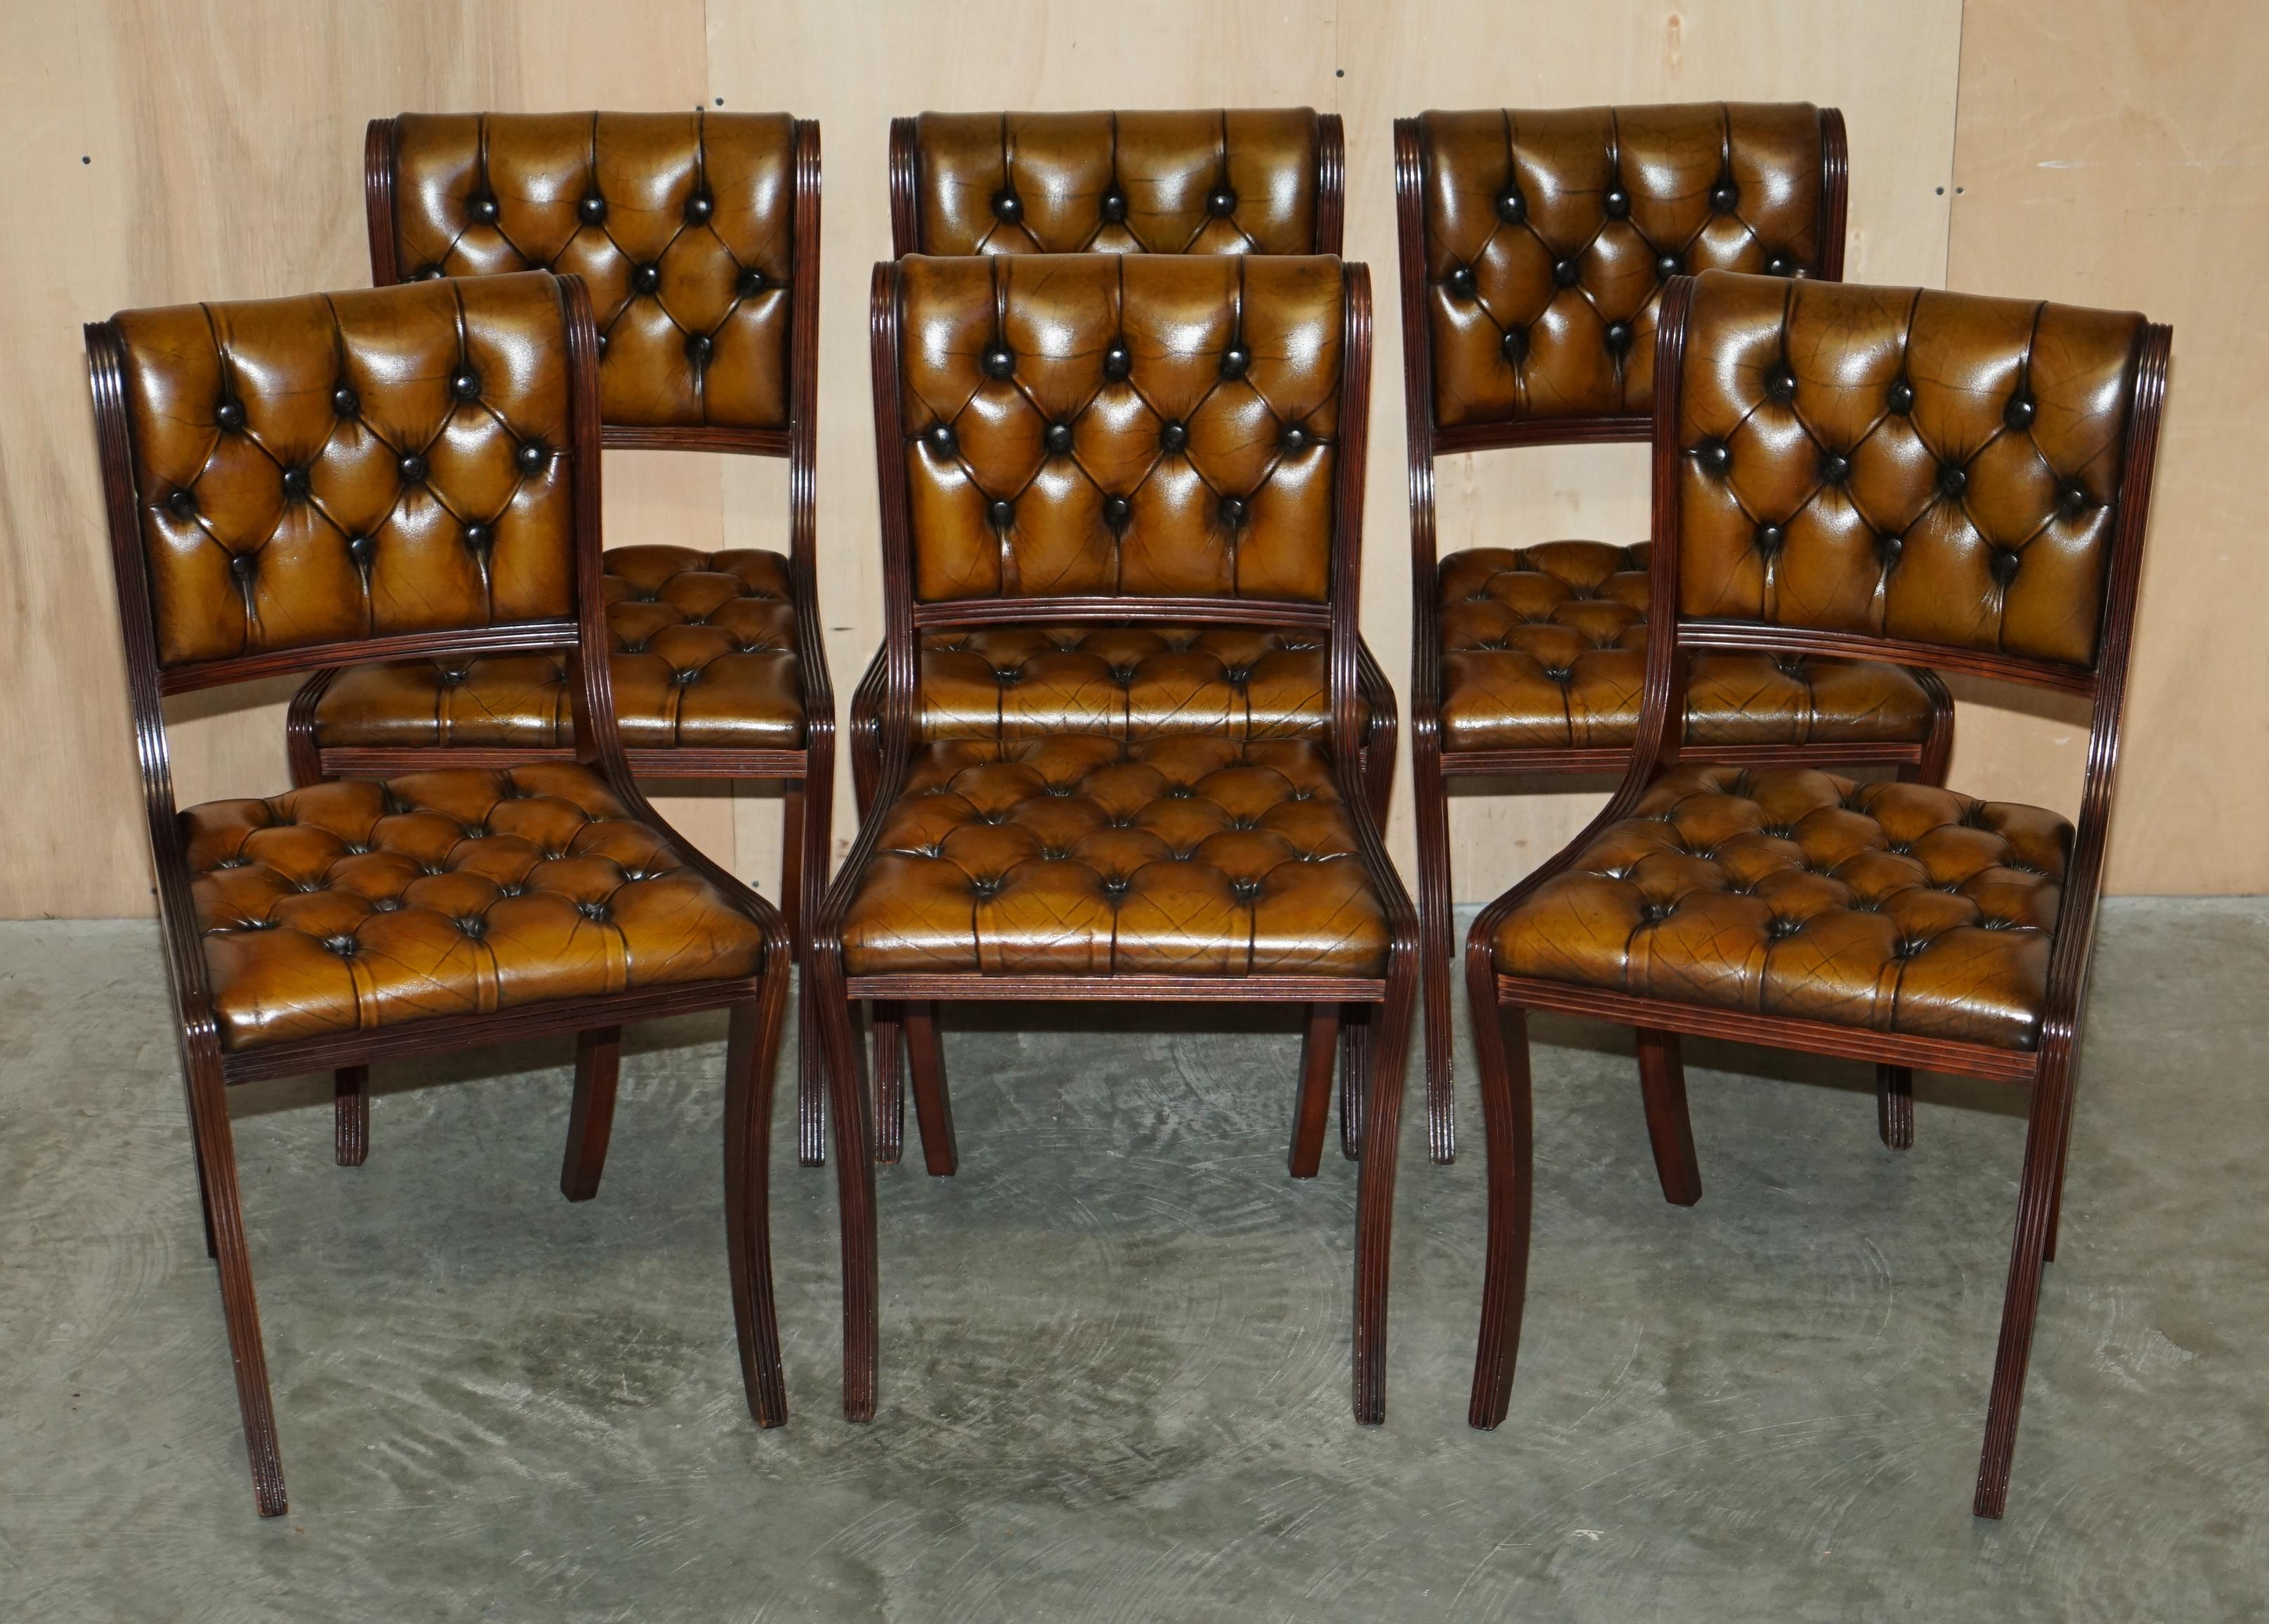 We are delighted to offer for sale this stunning suite of eight Regency style vintage fully restored Chesterfield aged cigar brown leather dining chairs in mahogany.

An absolutely sublime suite of eight vintage dining chairs. They are as